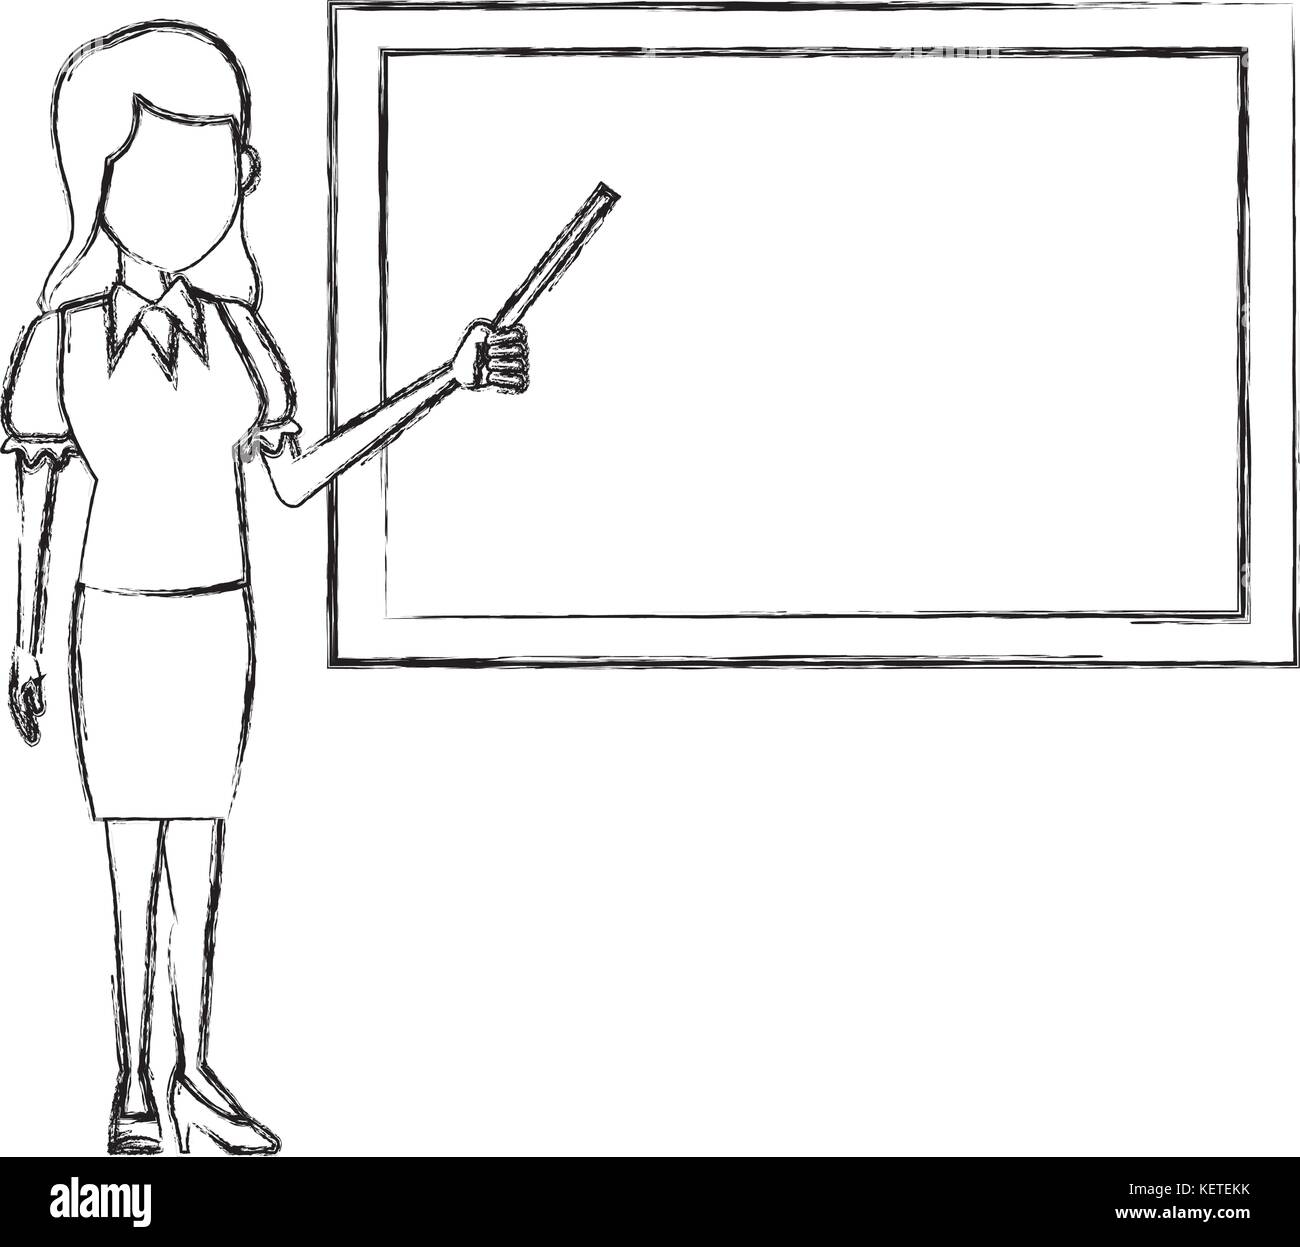 Classroom Black and White Stock Photos & Images - Alamy